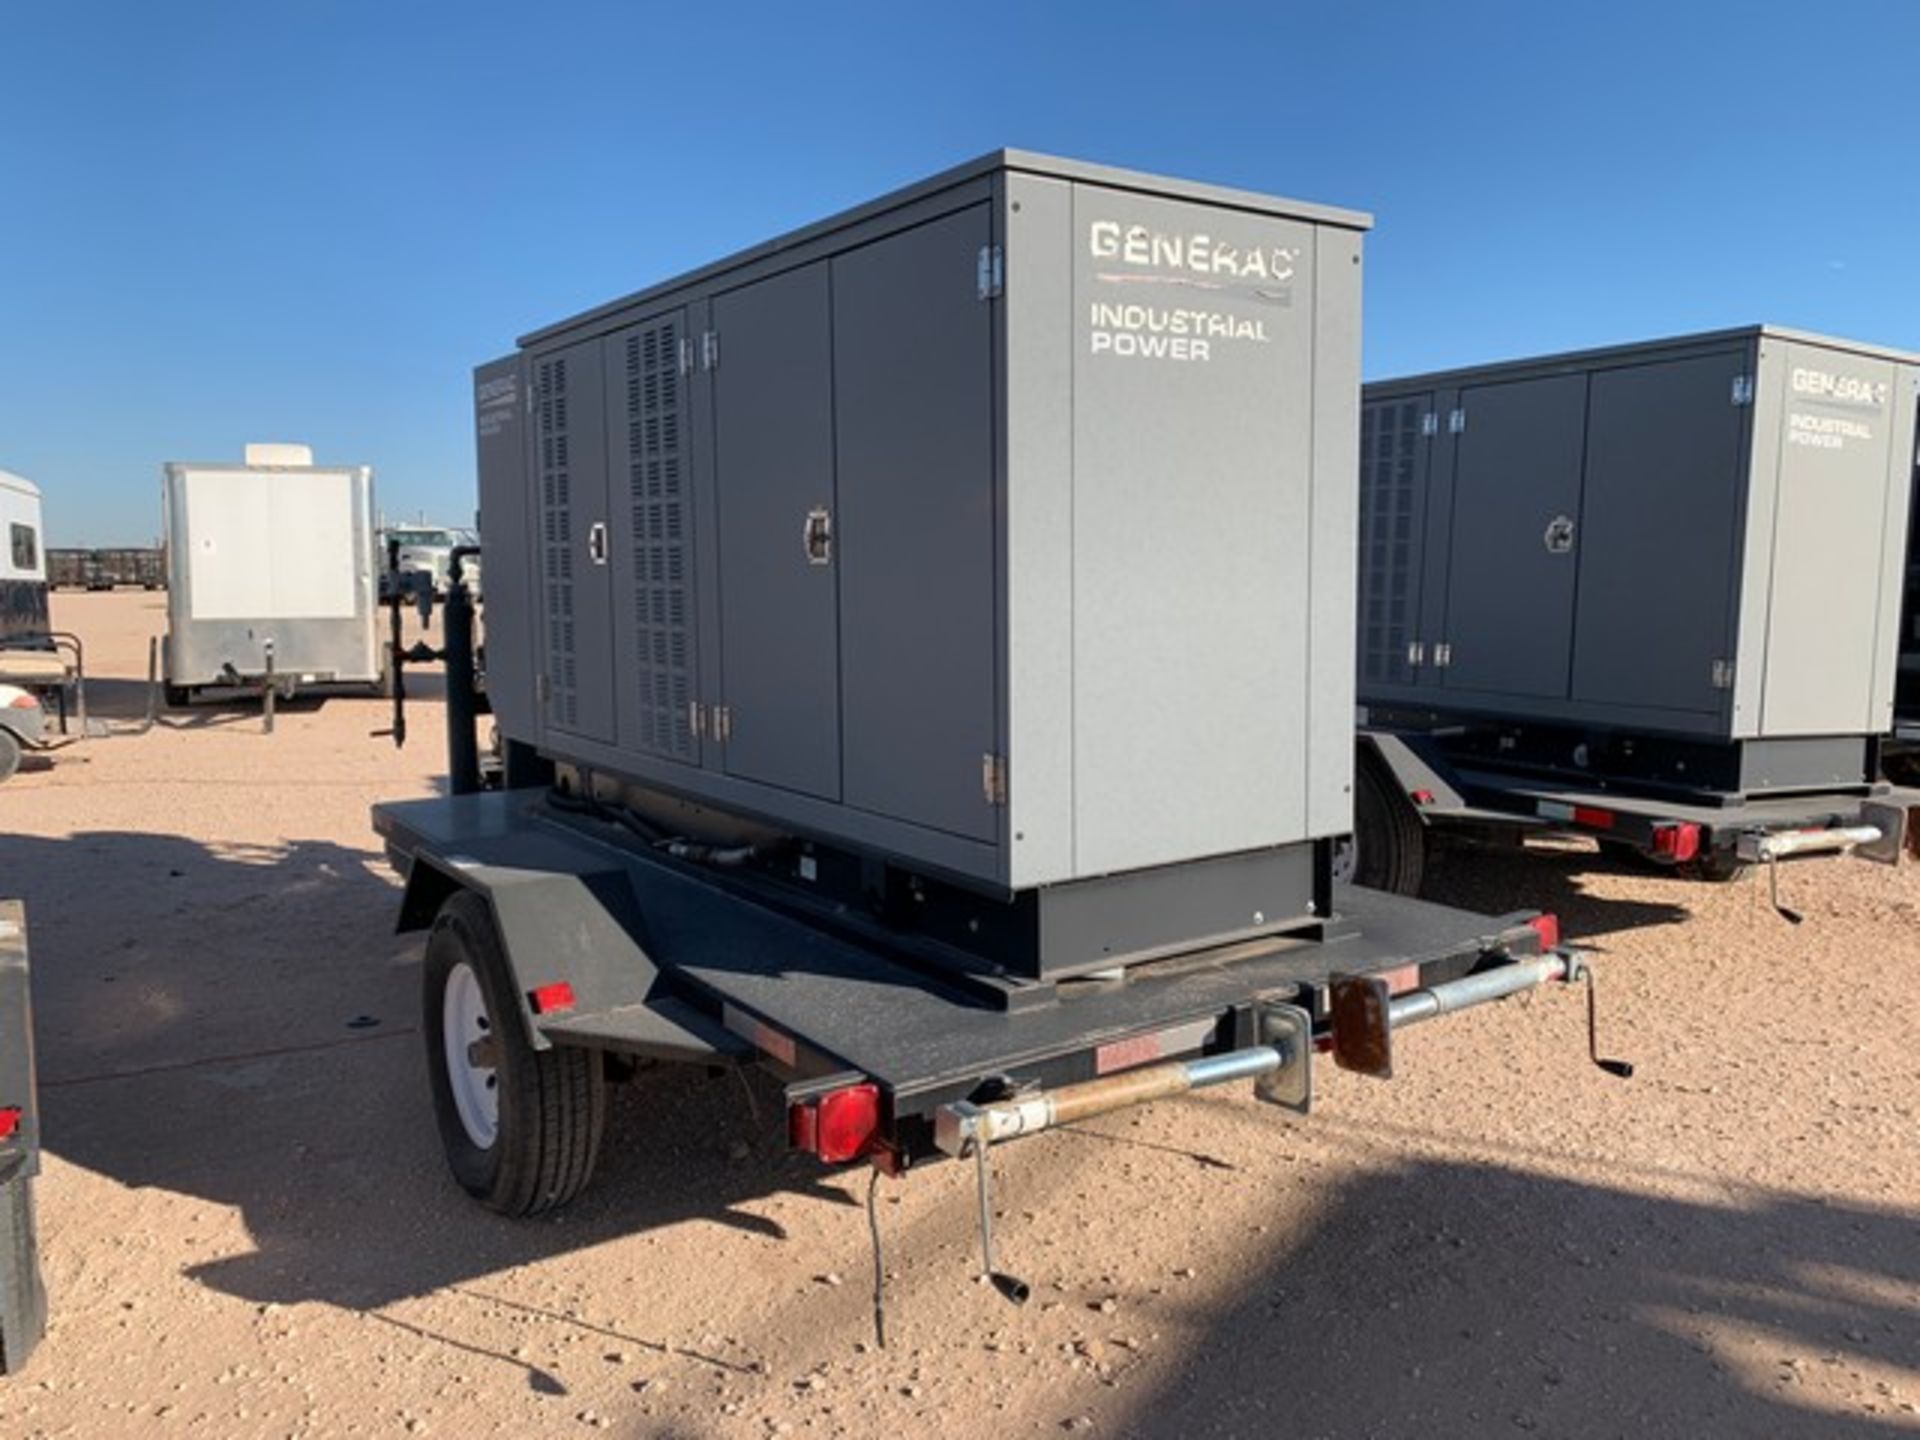 Located in YARD 1 - Midland, TX (2936) 2013 GENERAC INDUSTRIAL POWER 130 KW, 277/480V 3 PHASE - Image 4 of 4